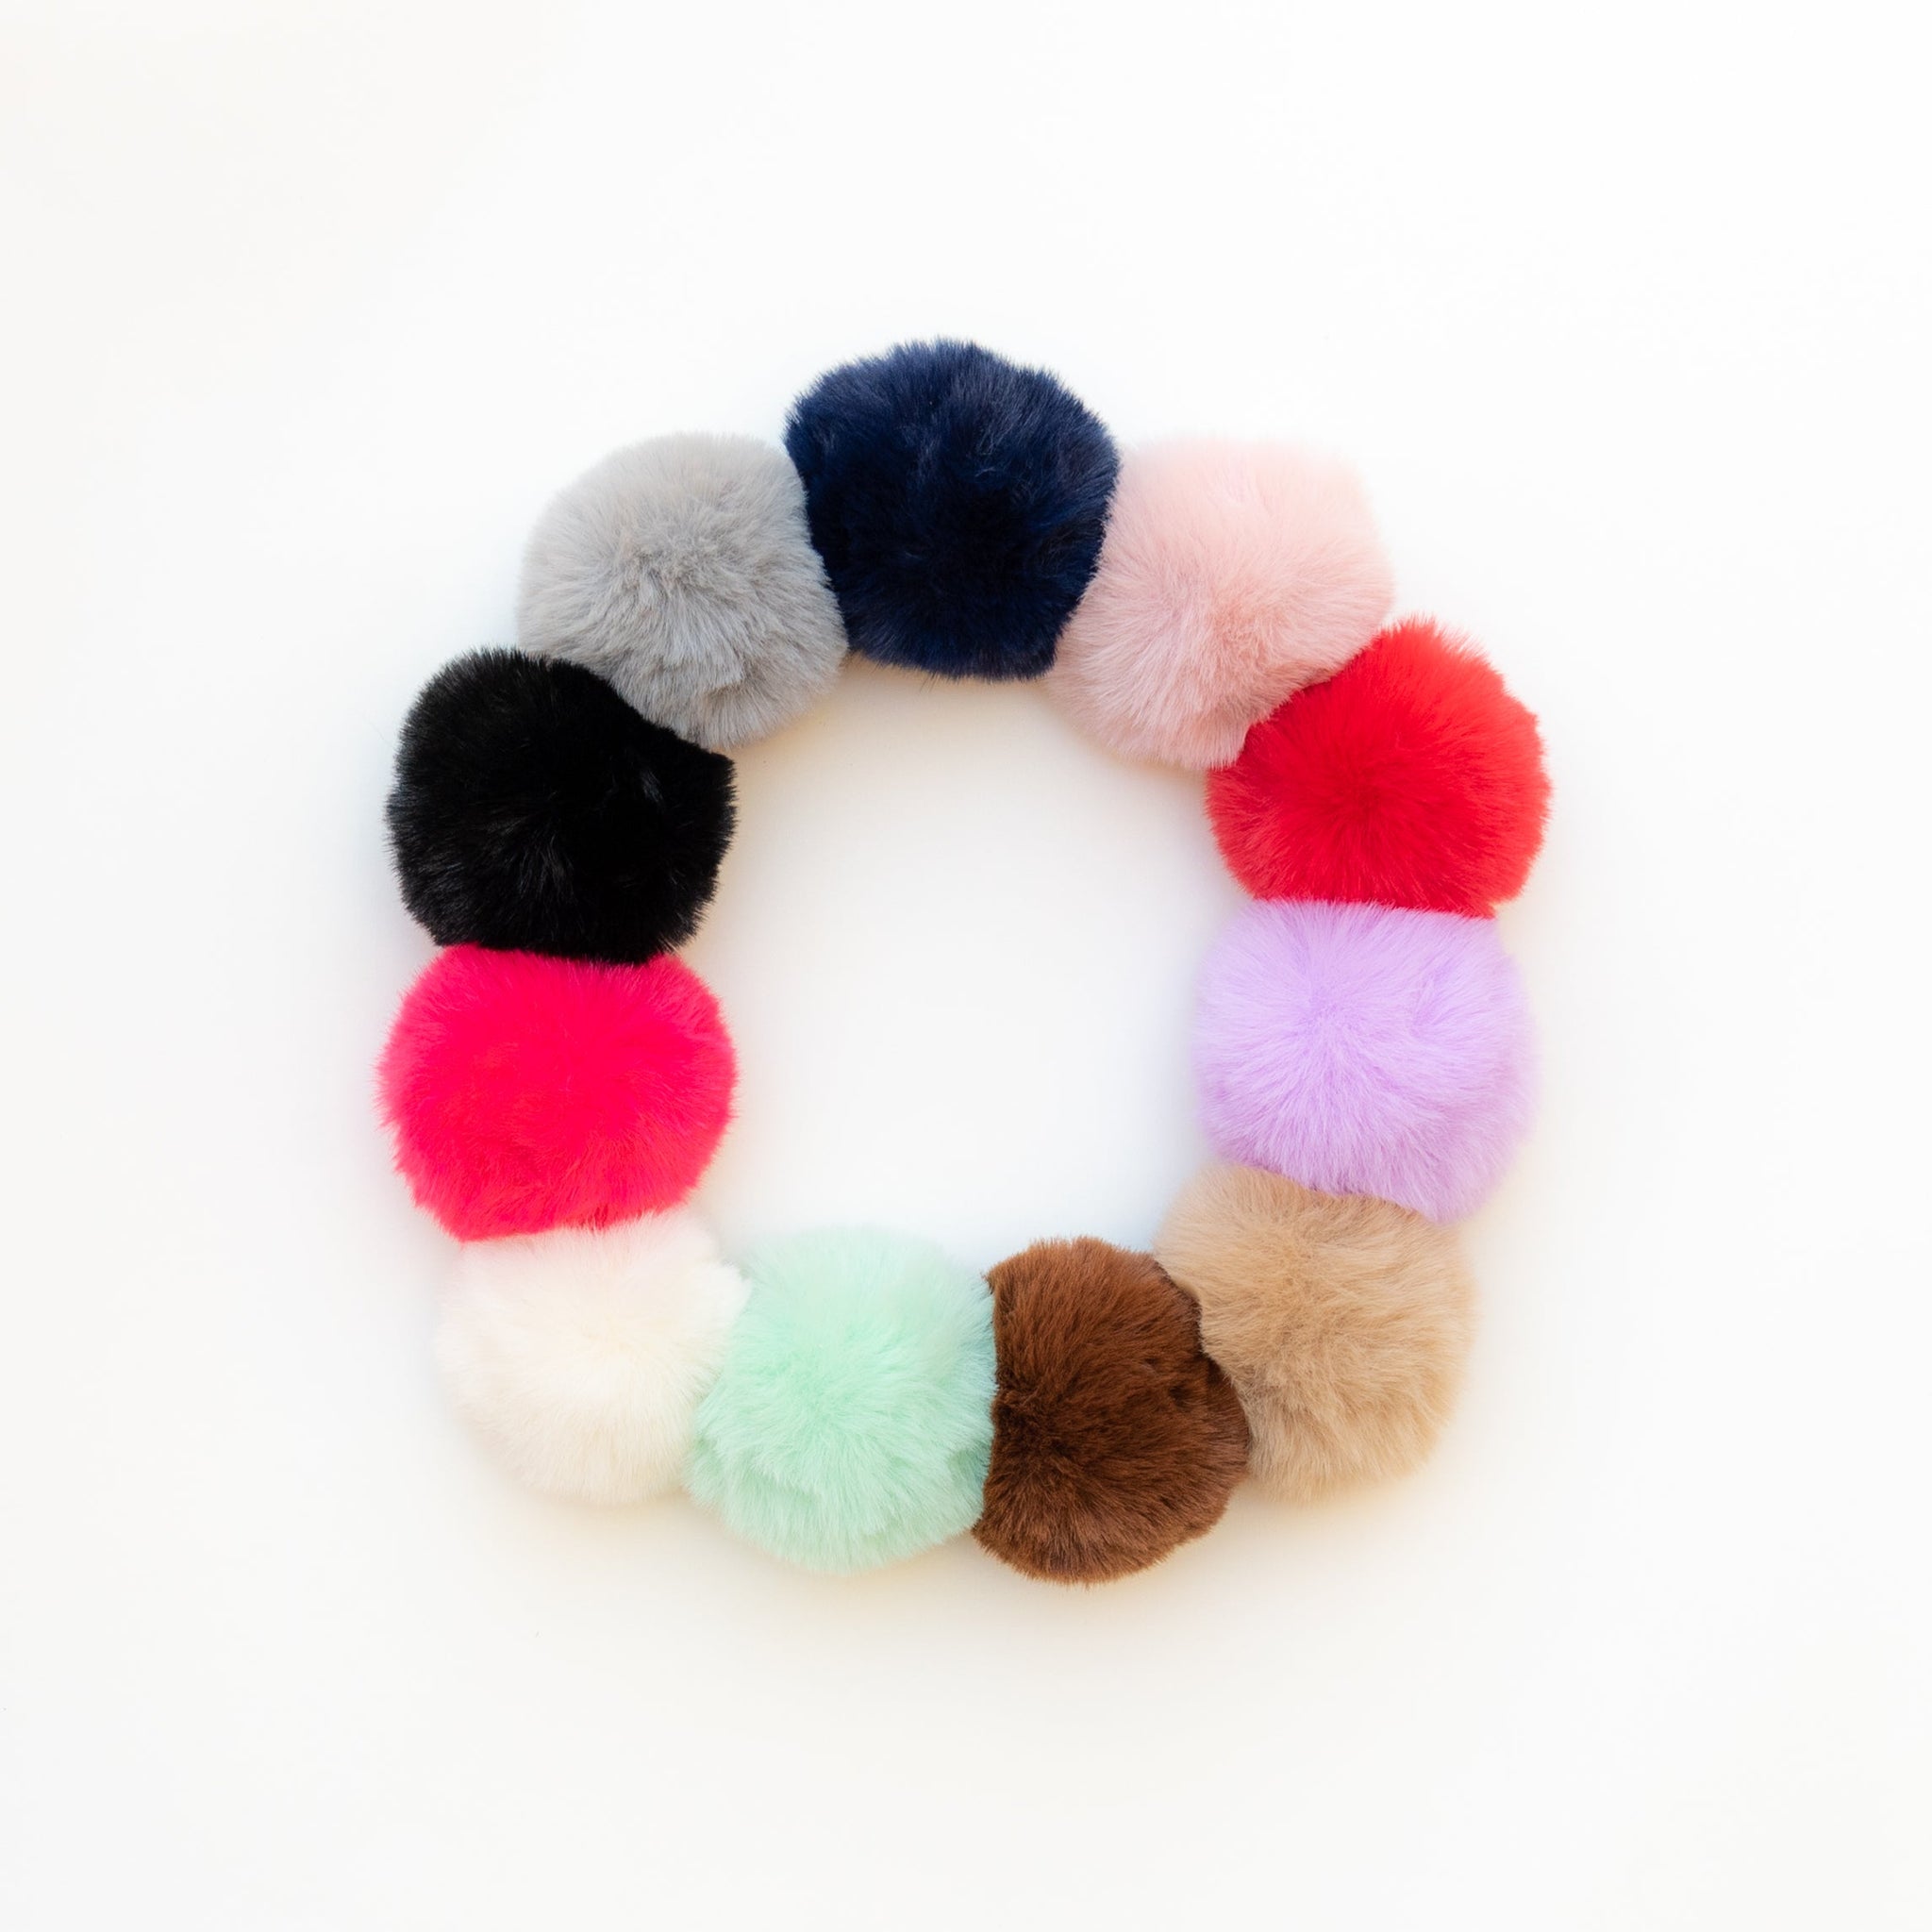  Halloscume 100 Pieces Faux Fur Pom Poms for Hats Fluffy Pom  Poms with Elastic Loop DIY Faux Fox Soft Fur Pom Pom for Crafts Hats  Beanies Scarves Gloves Bags Shoes Keychains